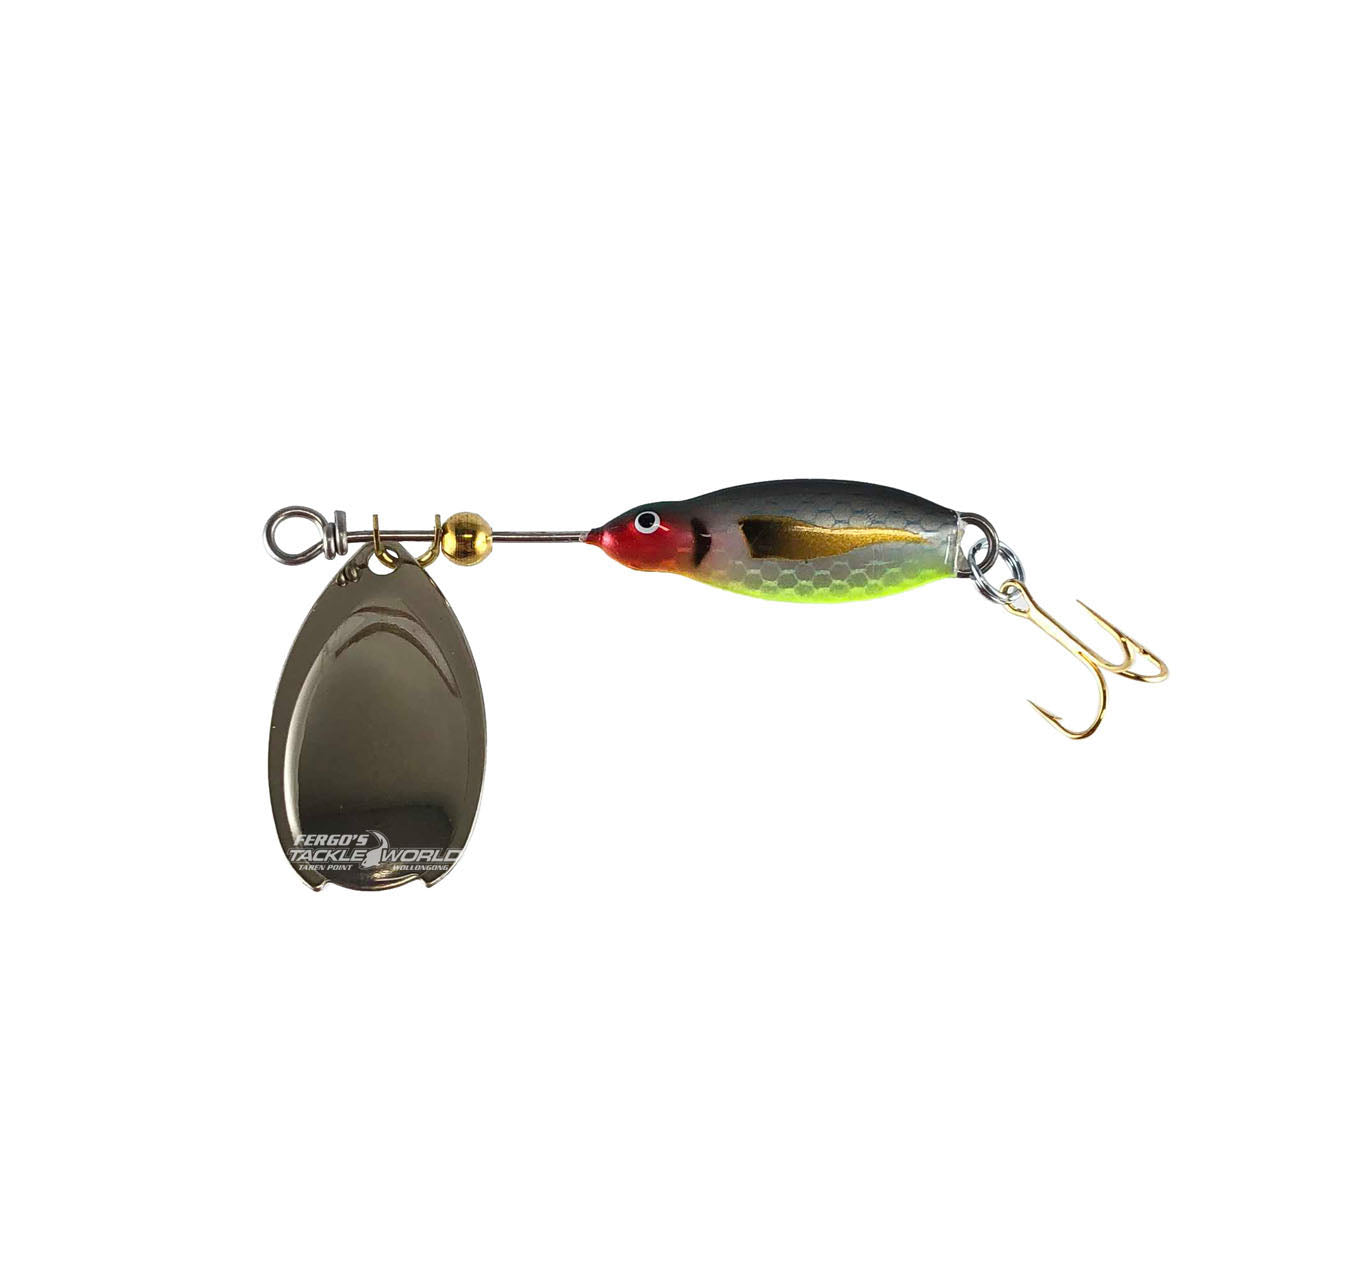 NILS MASTER 1570-3 Invincible Fishing LURE 8 G 8 cm in box $25.00